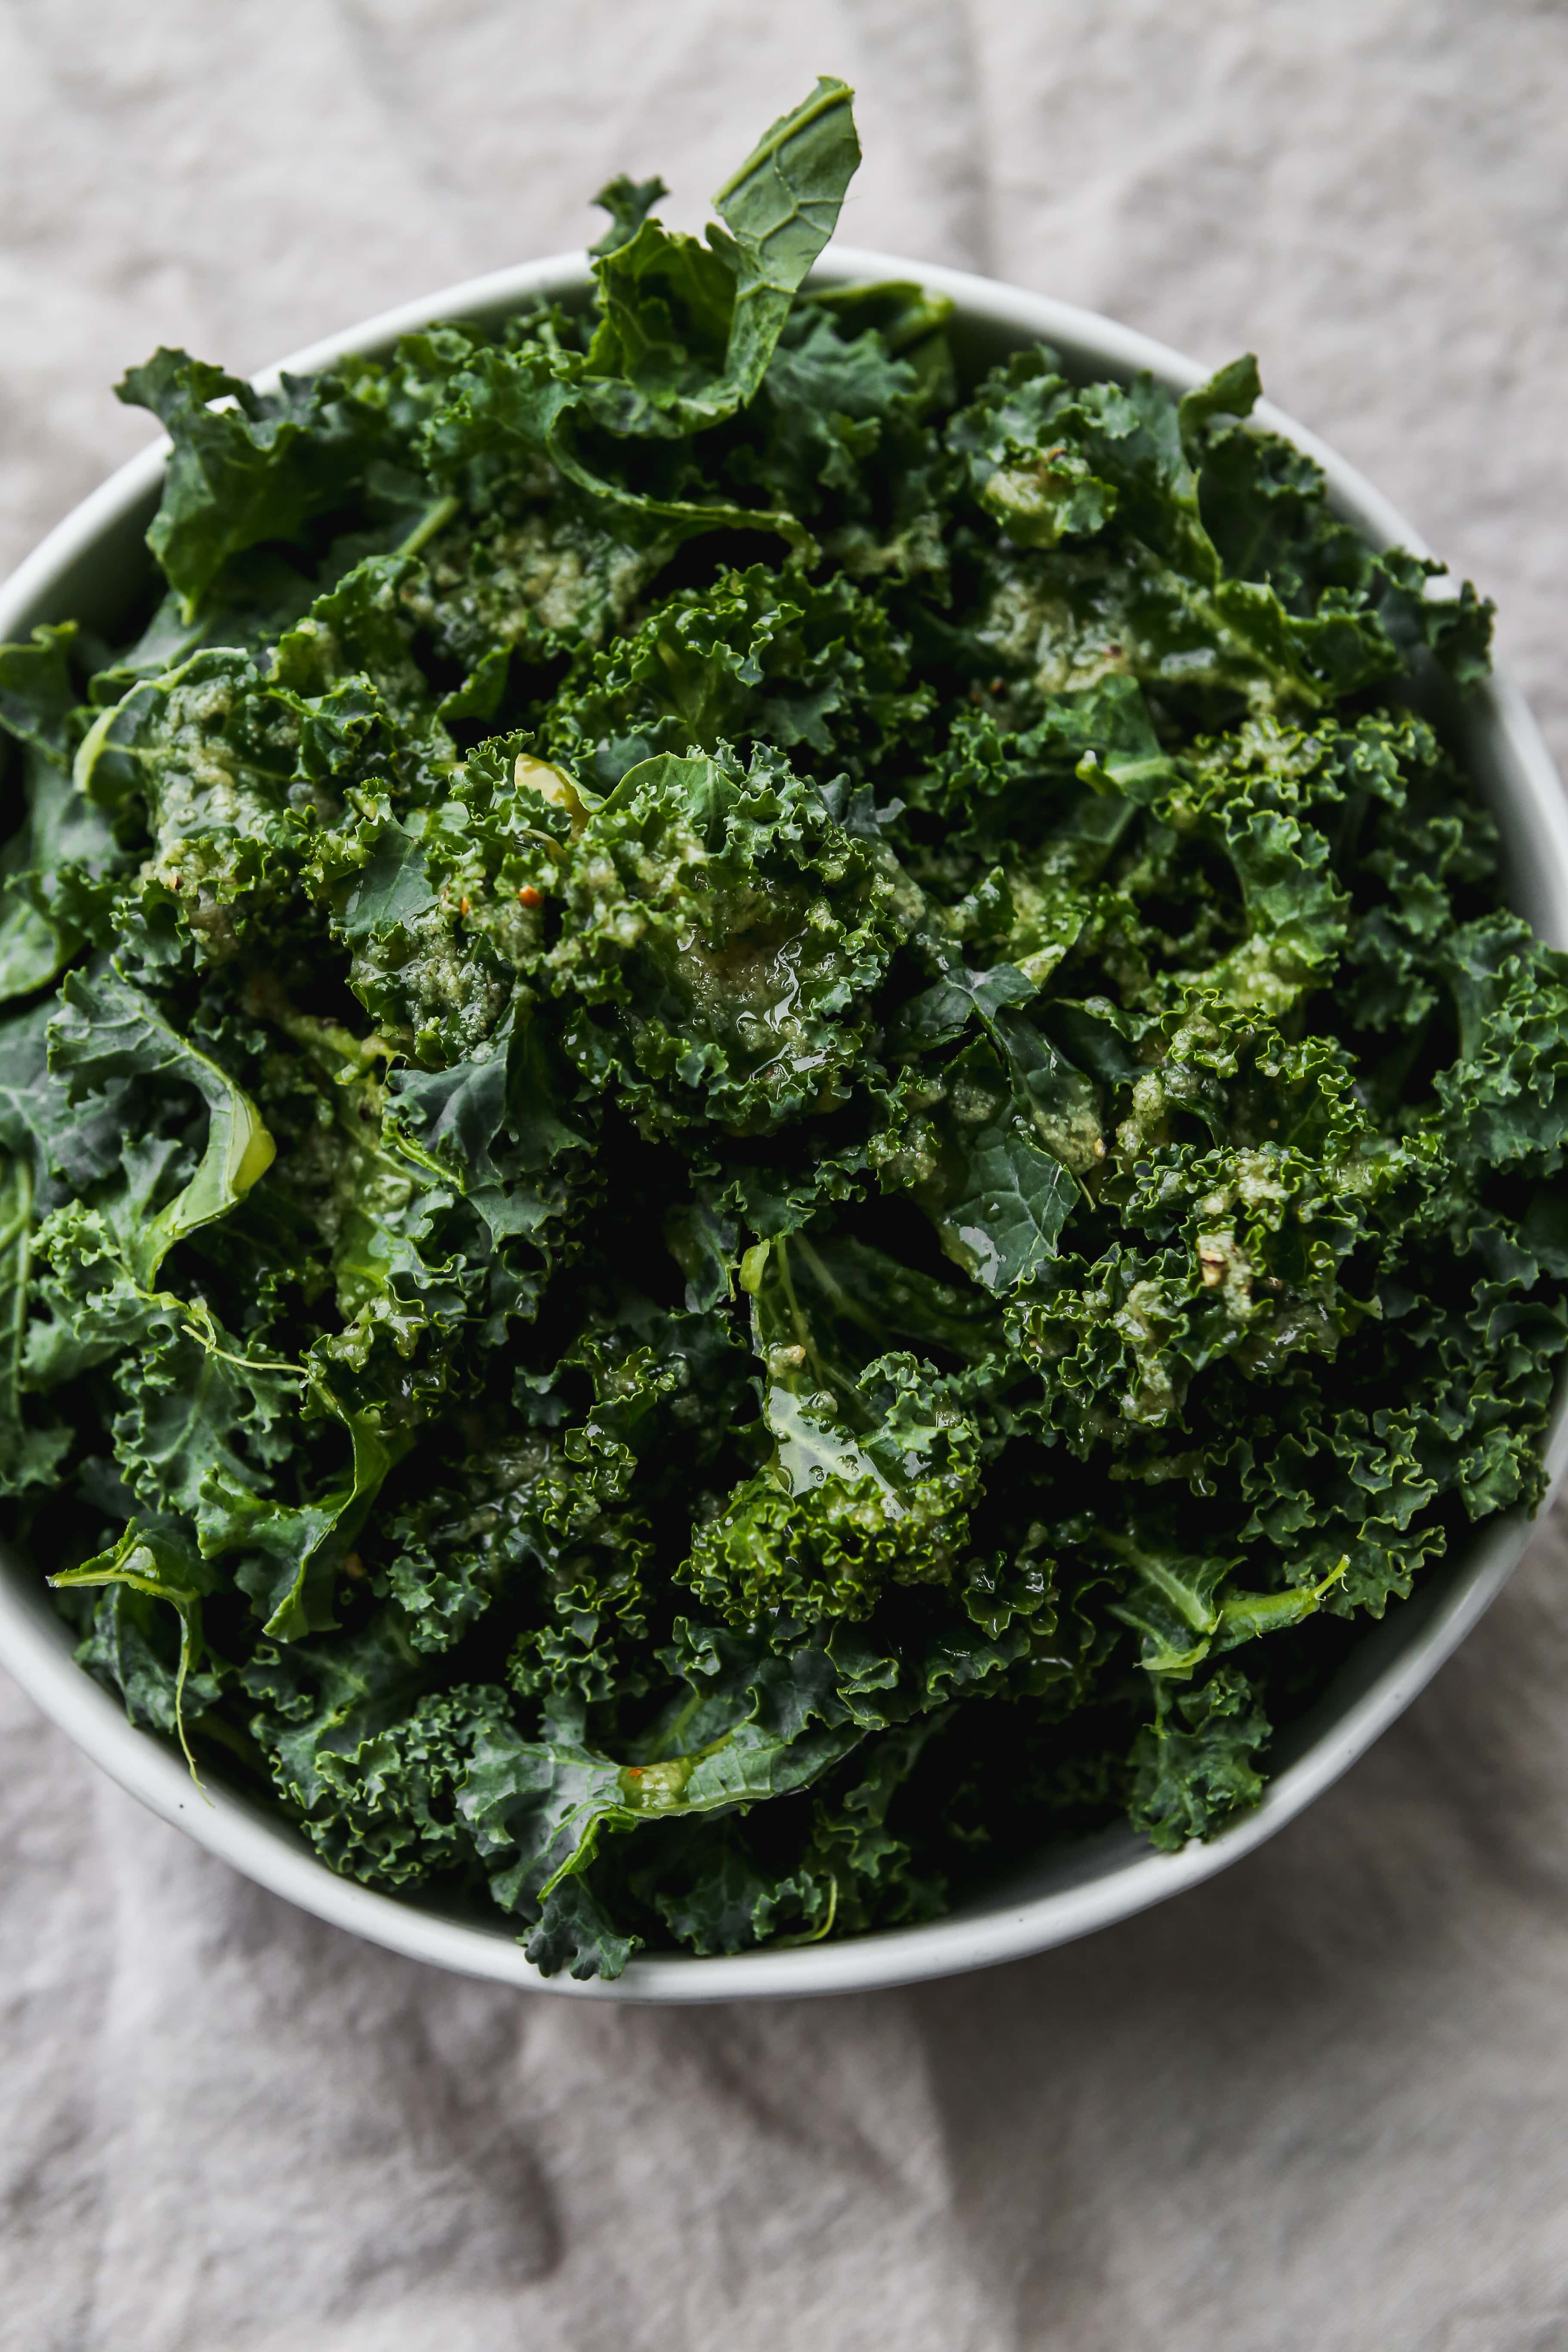 Overhead photo of a bowl of kale leaves with salad dressing overtop.